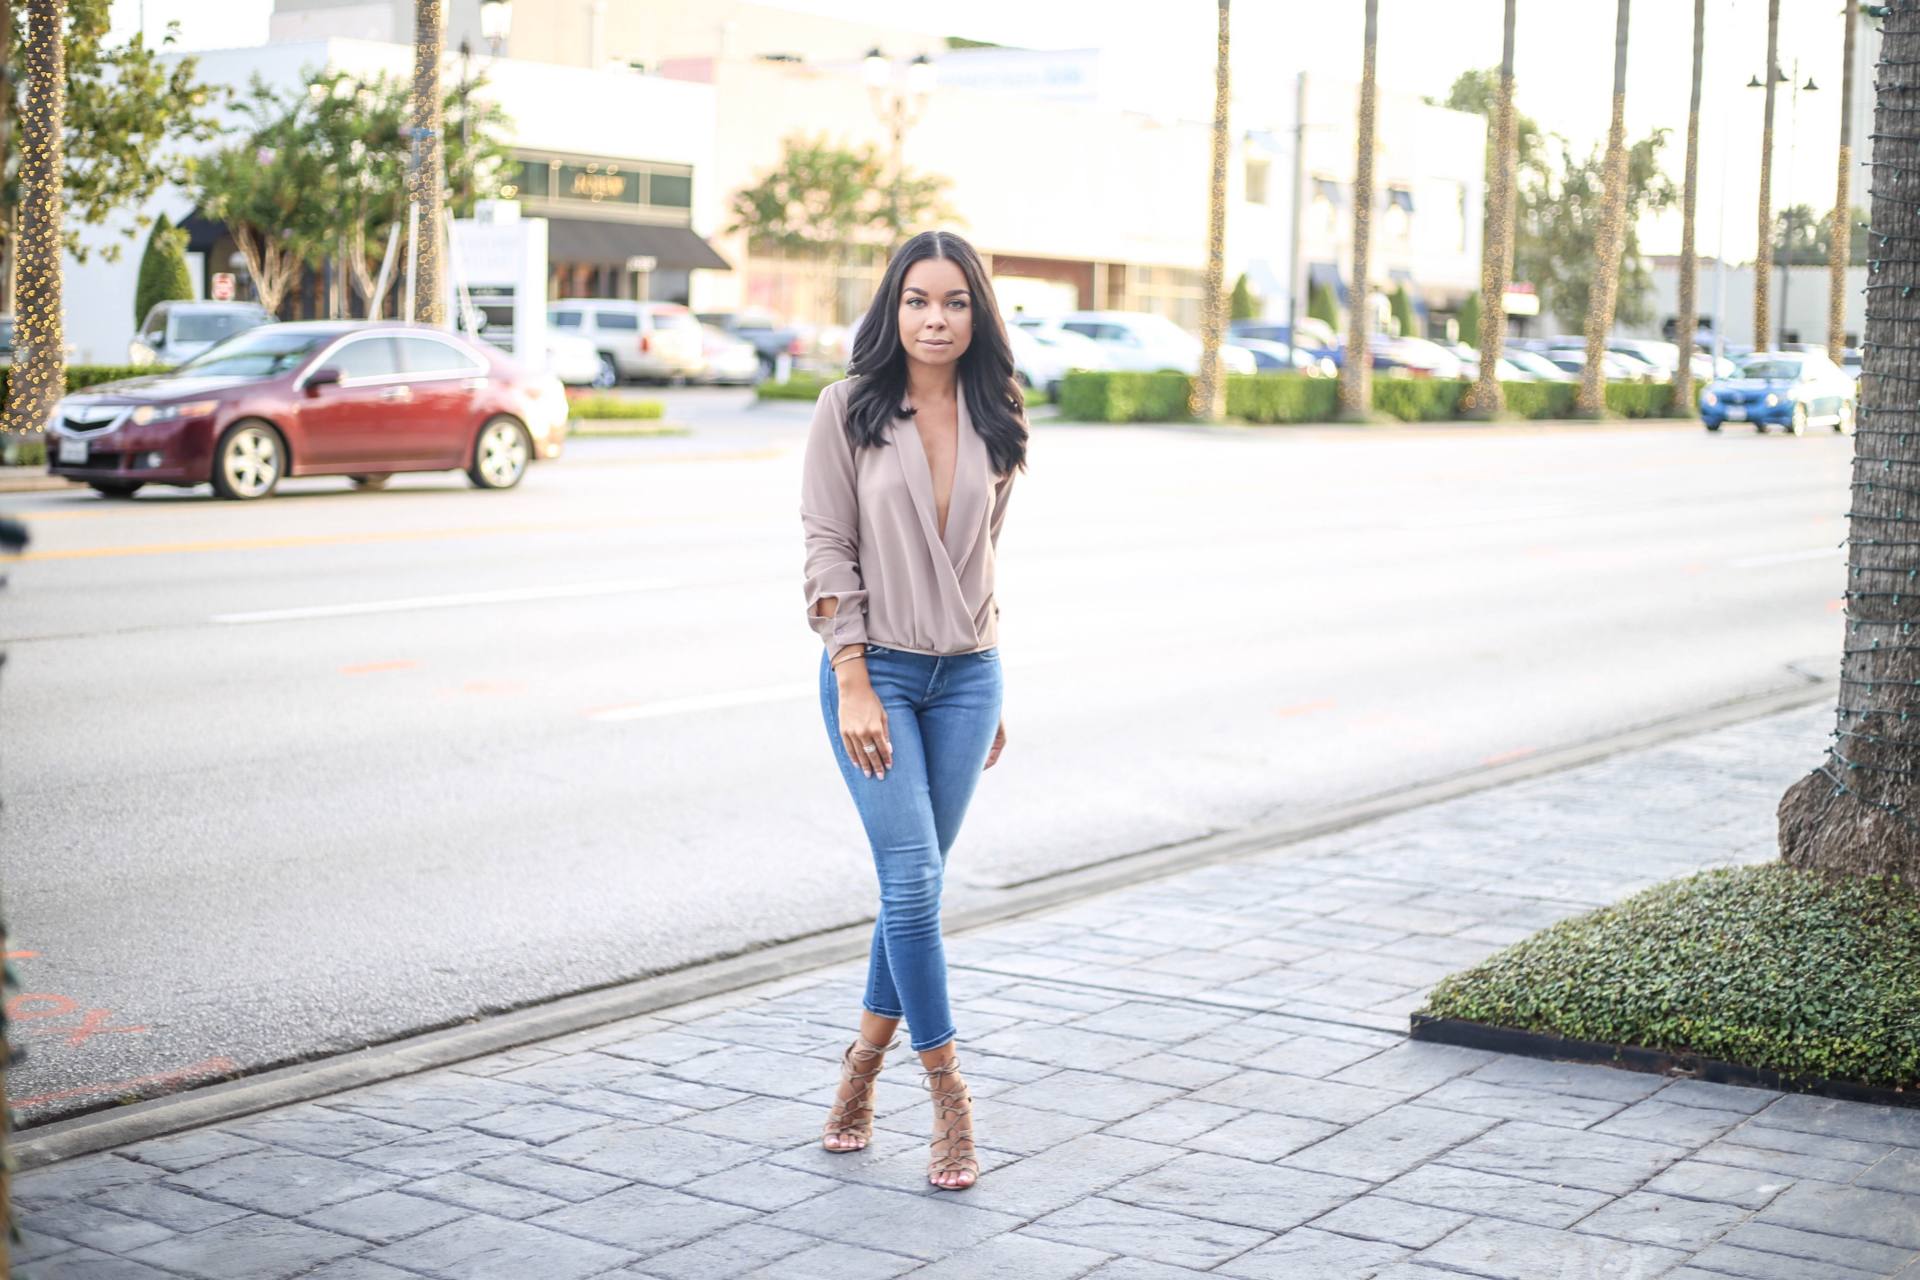 Mother crop denim with a twist front blouse and lace up nude heels